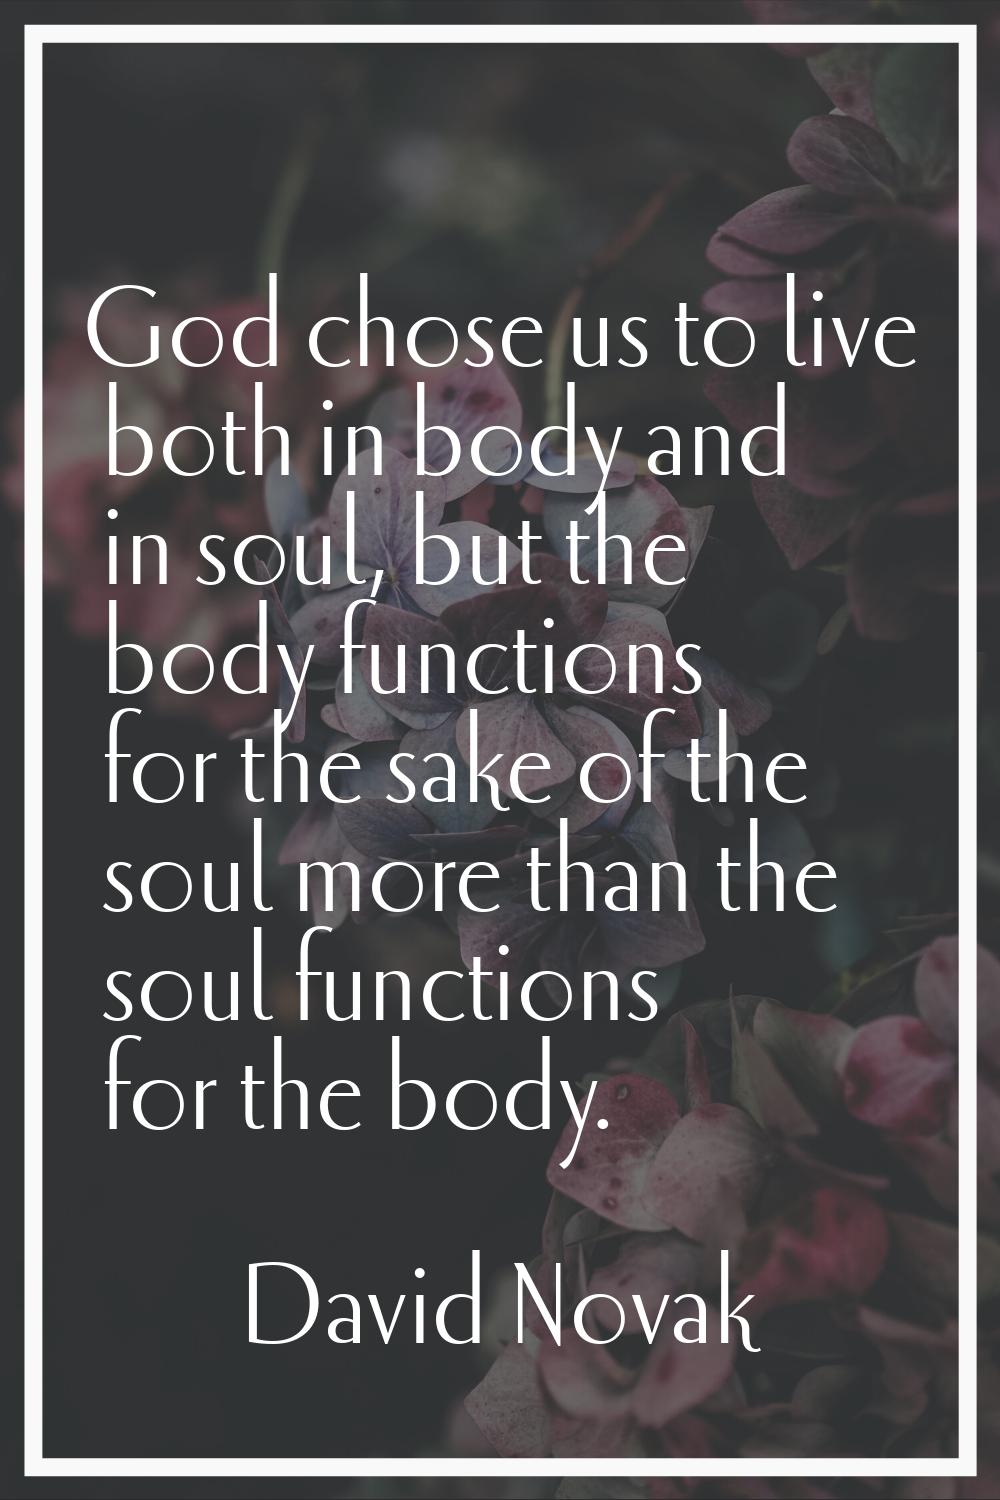 God chose us to live both in body and in soul, but the body functions for the sake of the soul more